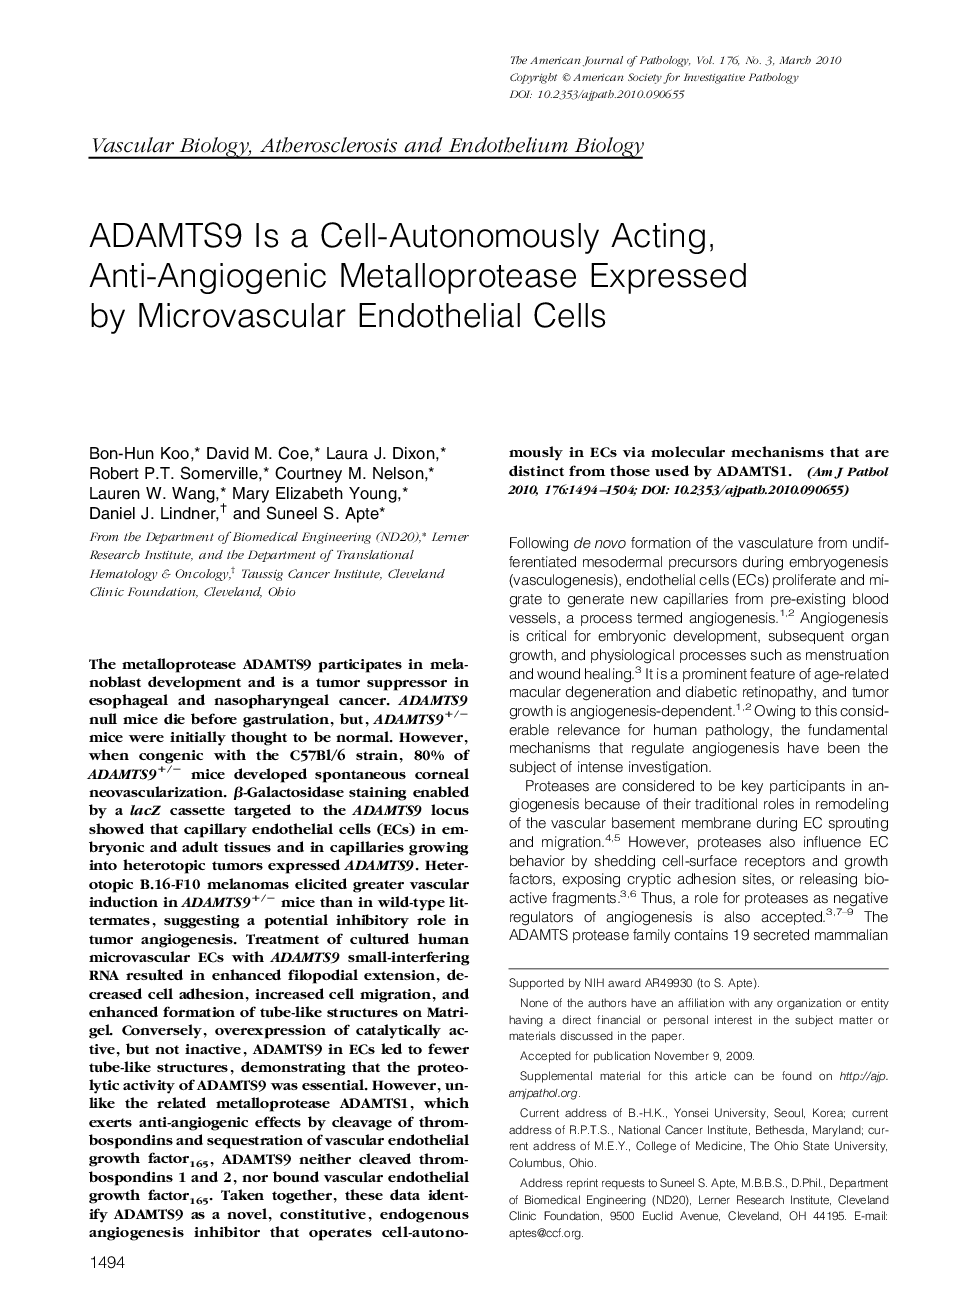 ADAMTS9 Is a Cell-Autonomously Acting, Anti-Angiogenic Metalloprotease Expressed by Microvascular Endothelial Cells